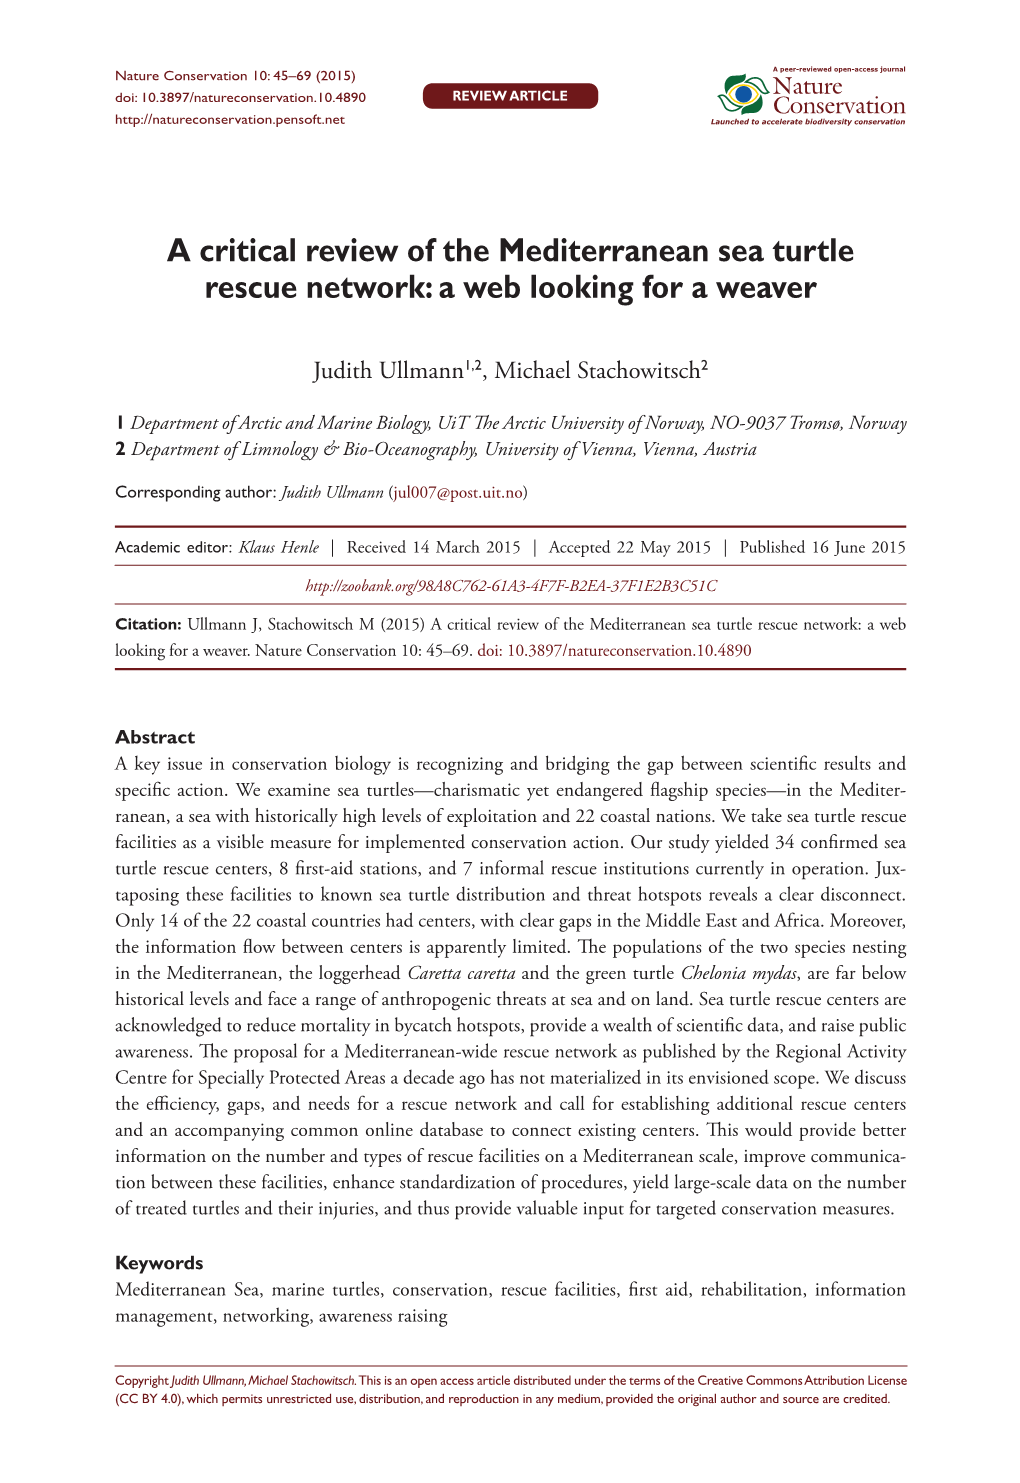 A Critical Review of the Mediterranean Sea Turtle Rescue Network: a Web Looking for a Weaver